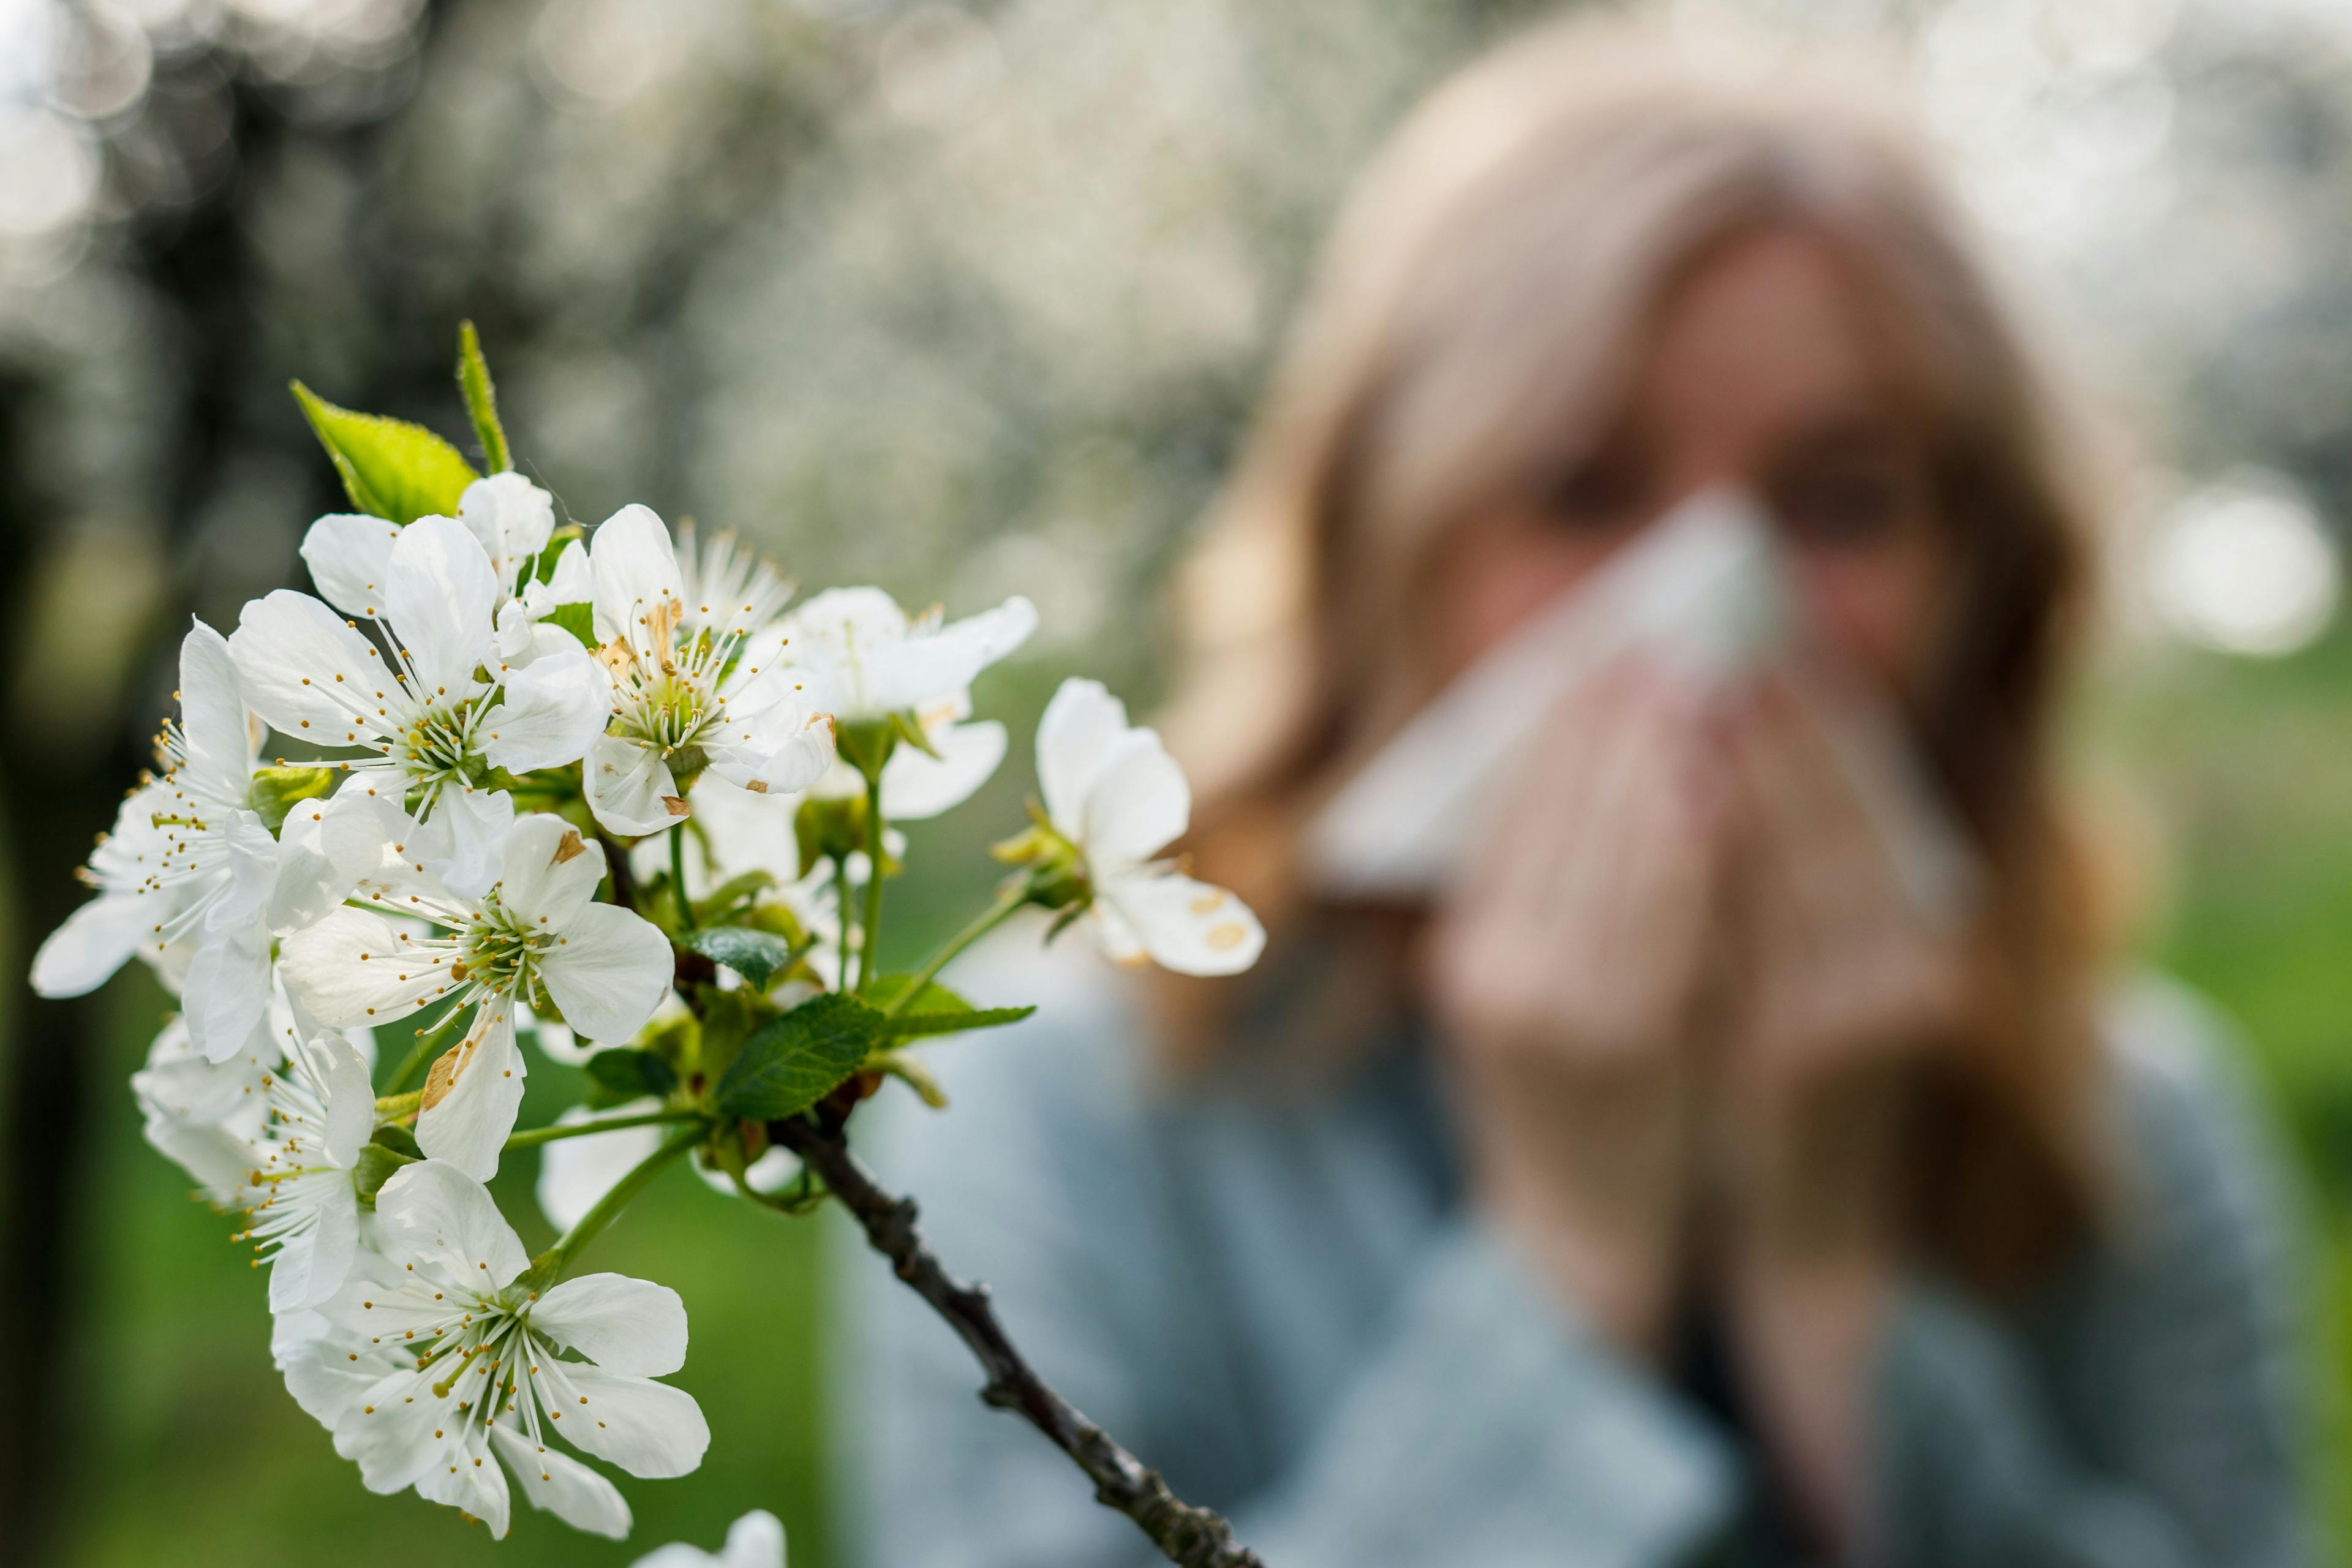 Asthma and Allergy Awareness Month: Resources Roundup